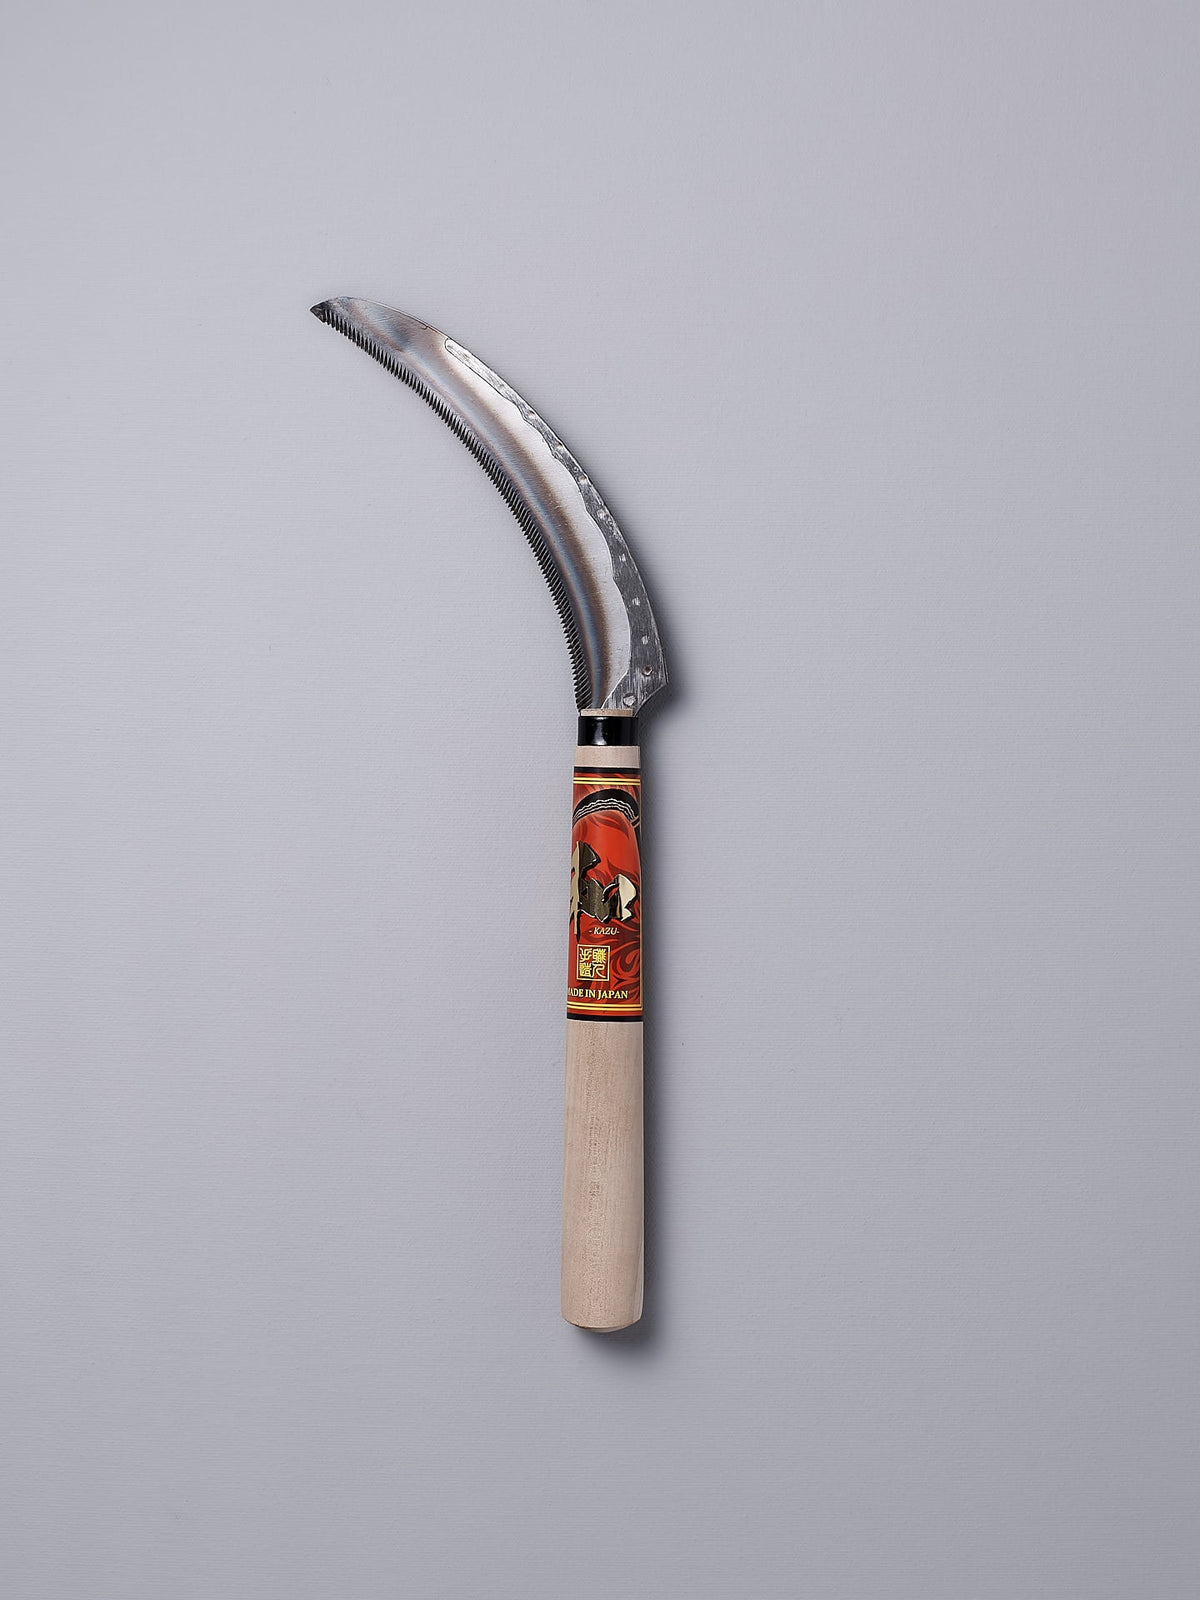 A Flax Cutter with a wooden handle on a gray background. (Maruyoshi)